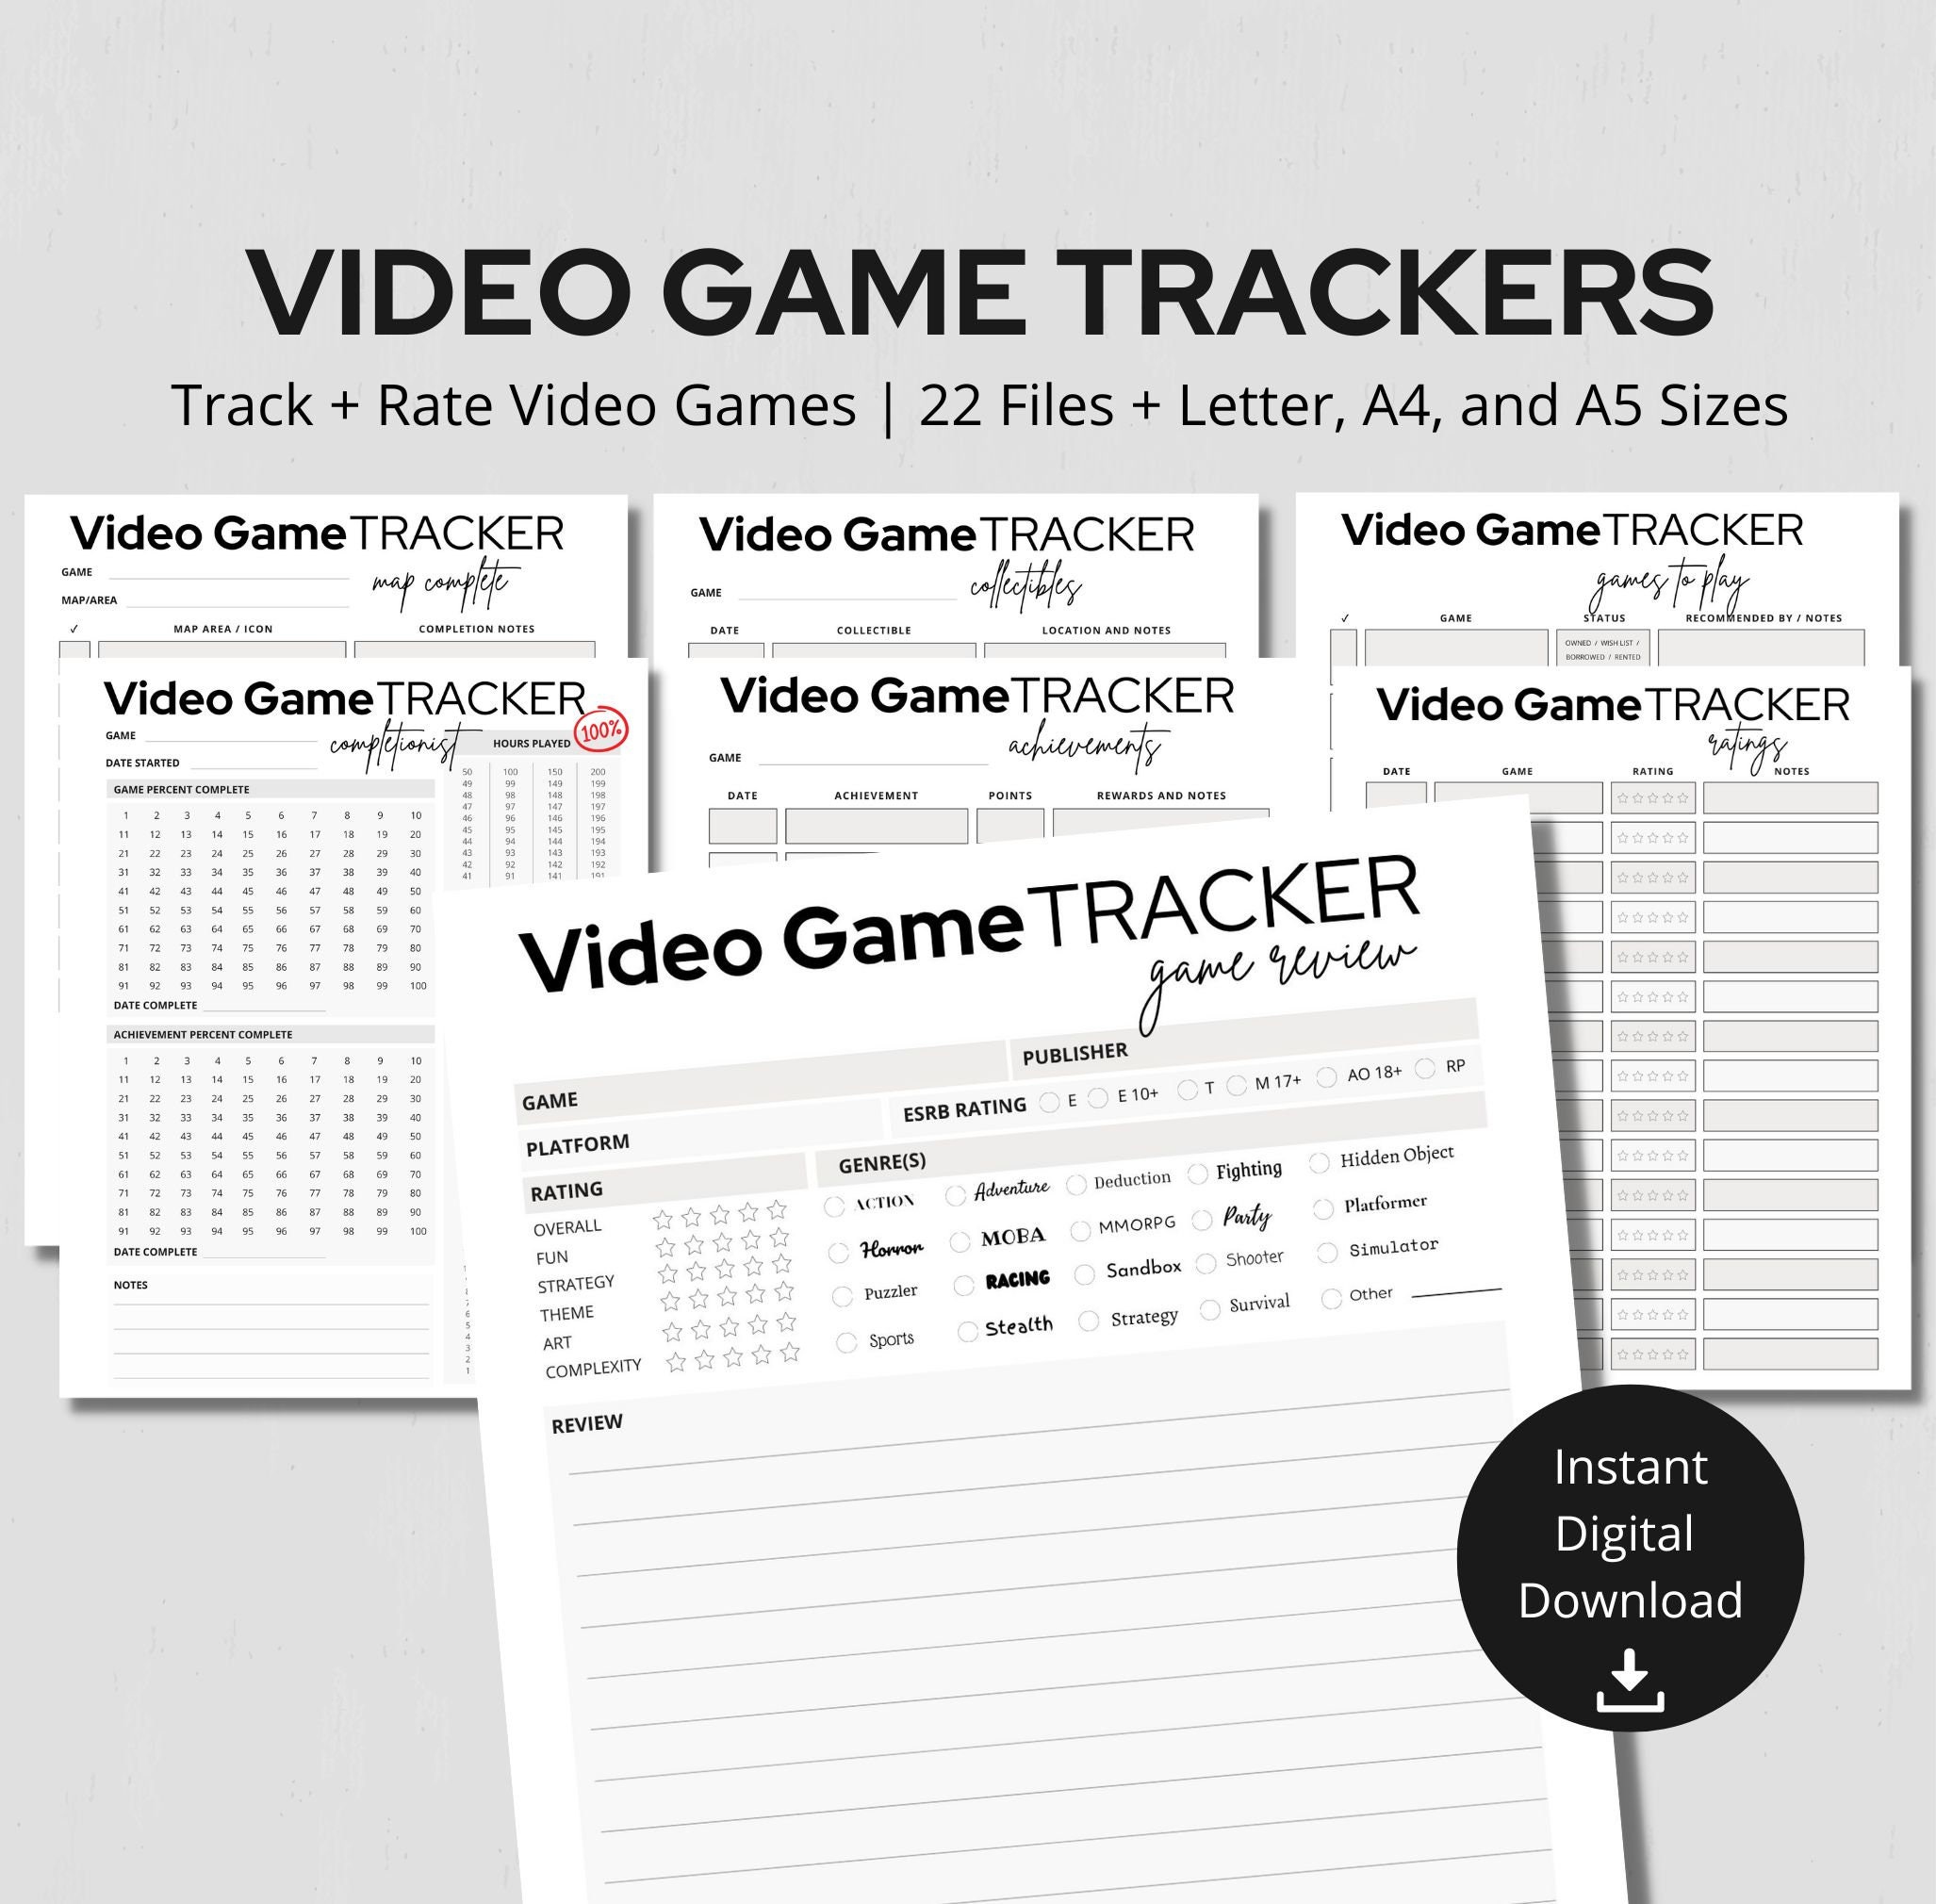 Video games score tracker KDP interior journal. Daily online games score  and achievement tracker template. KDP interior notebook. Video games  characte Stock Vector Image & Art - Alamy